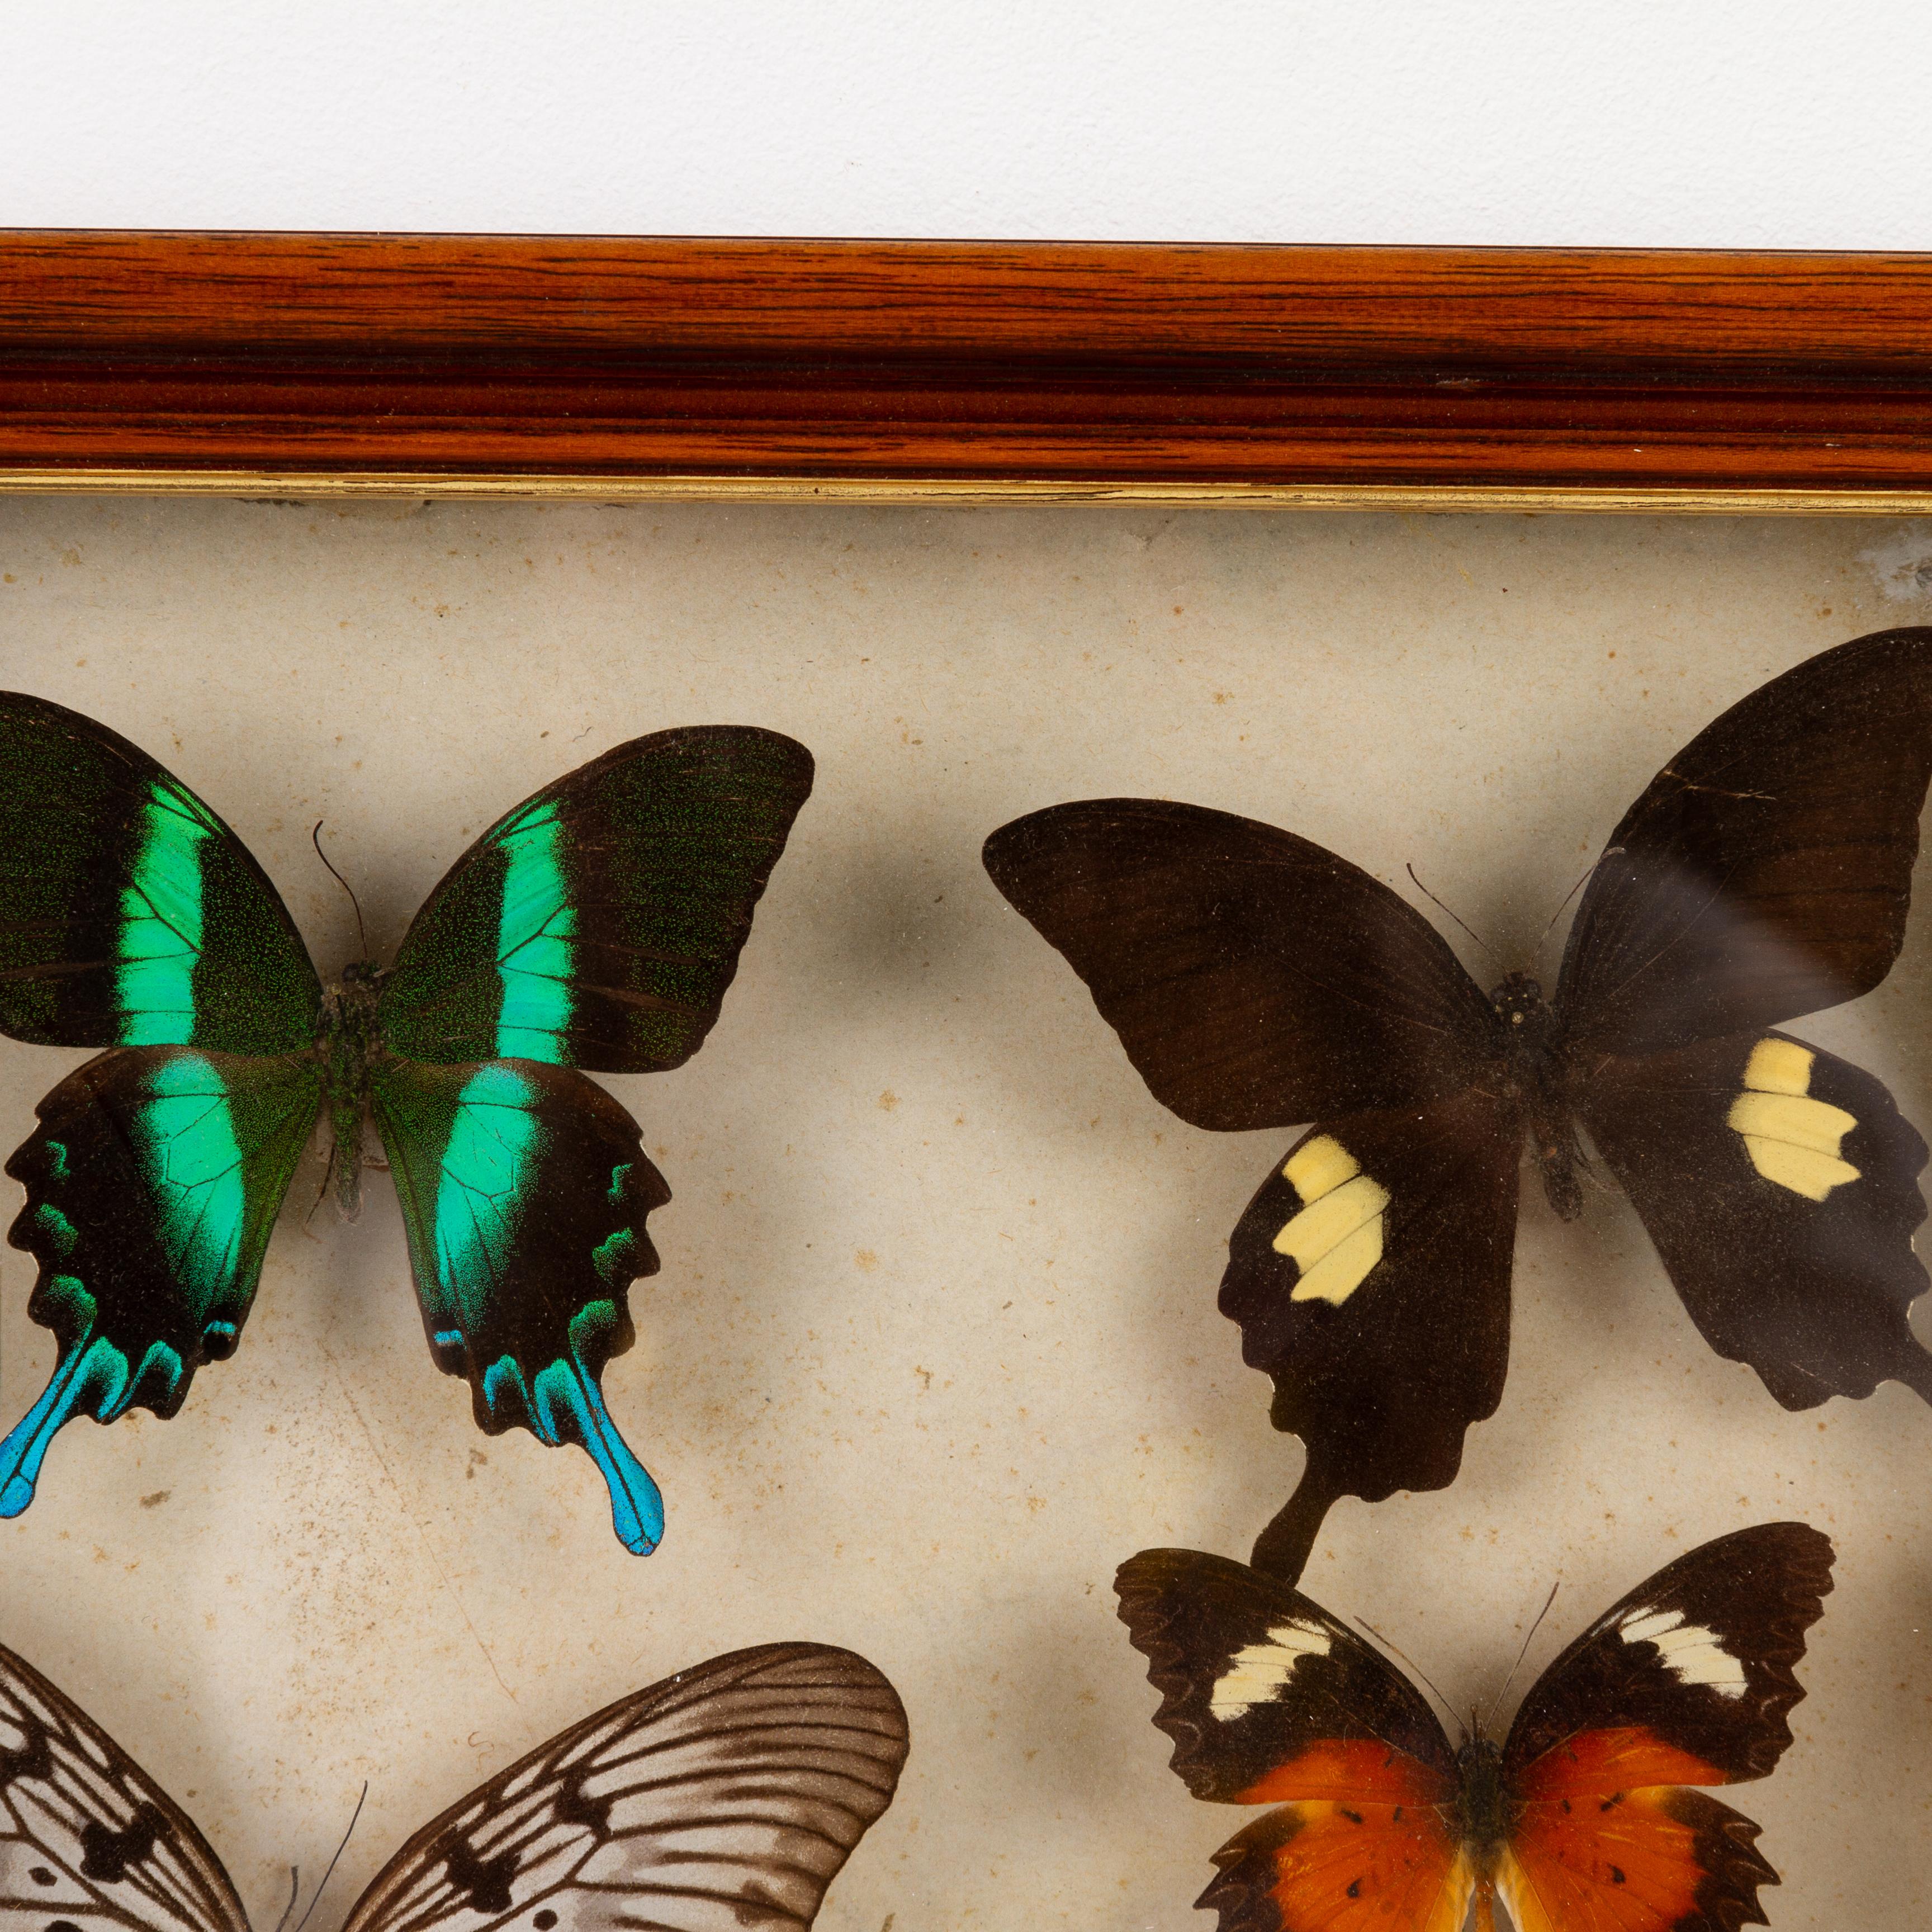 In good condition
From a private collection
Free international shipping
East Indonesian Exotic Butterflies Taxidermy Display Celebes Islands
